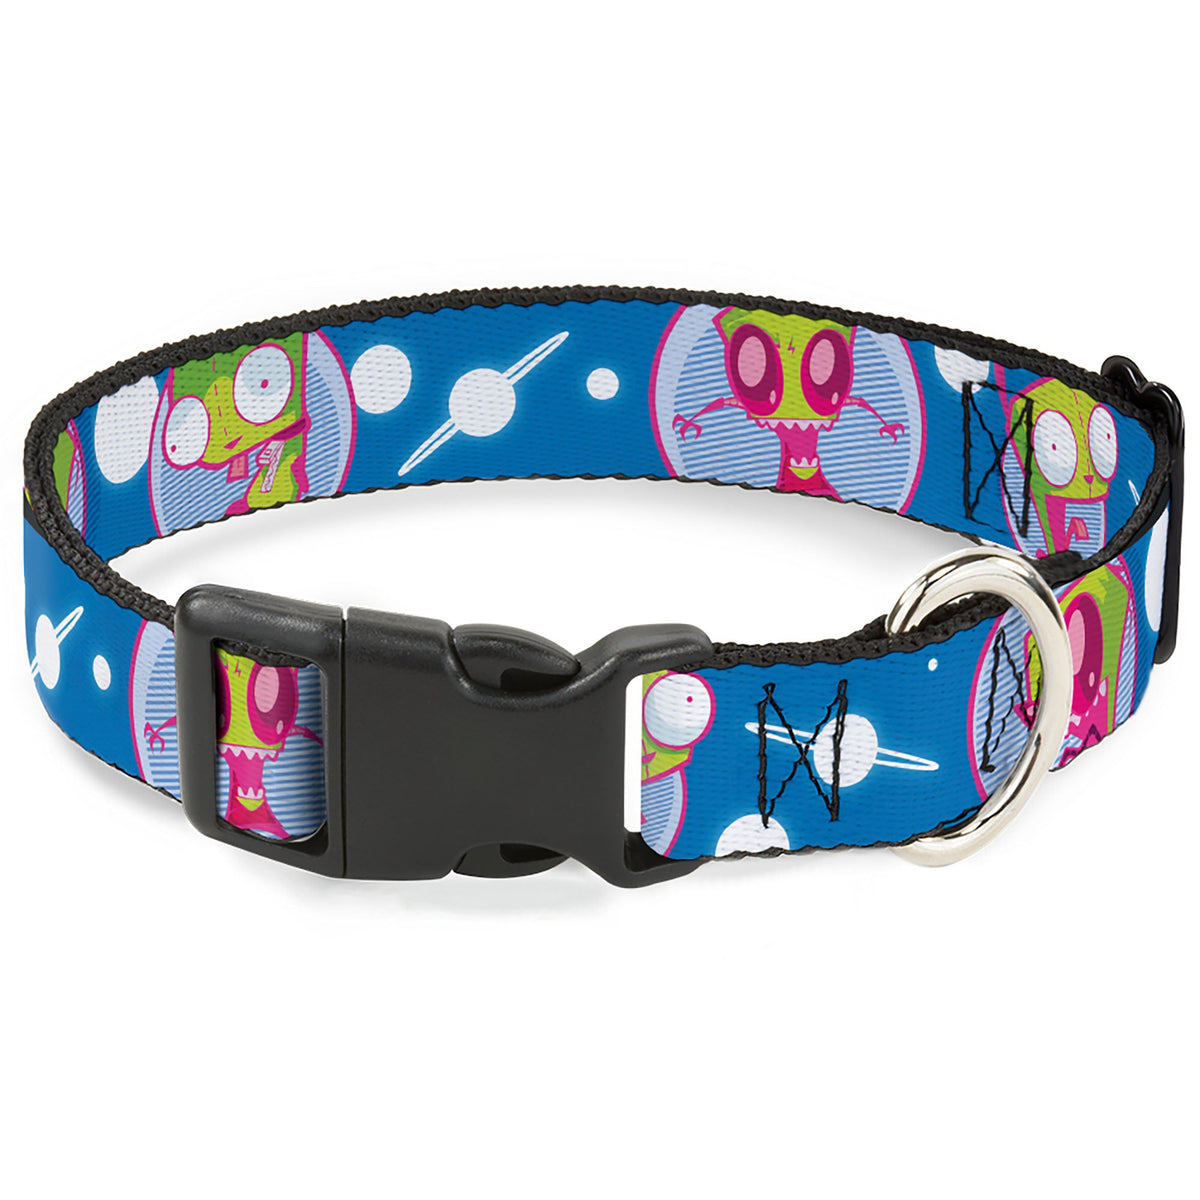 Plastic Clip Collar - Invader Zim and GIR Poses and Planets Blue/White